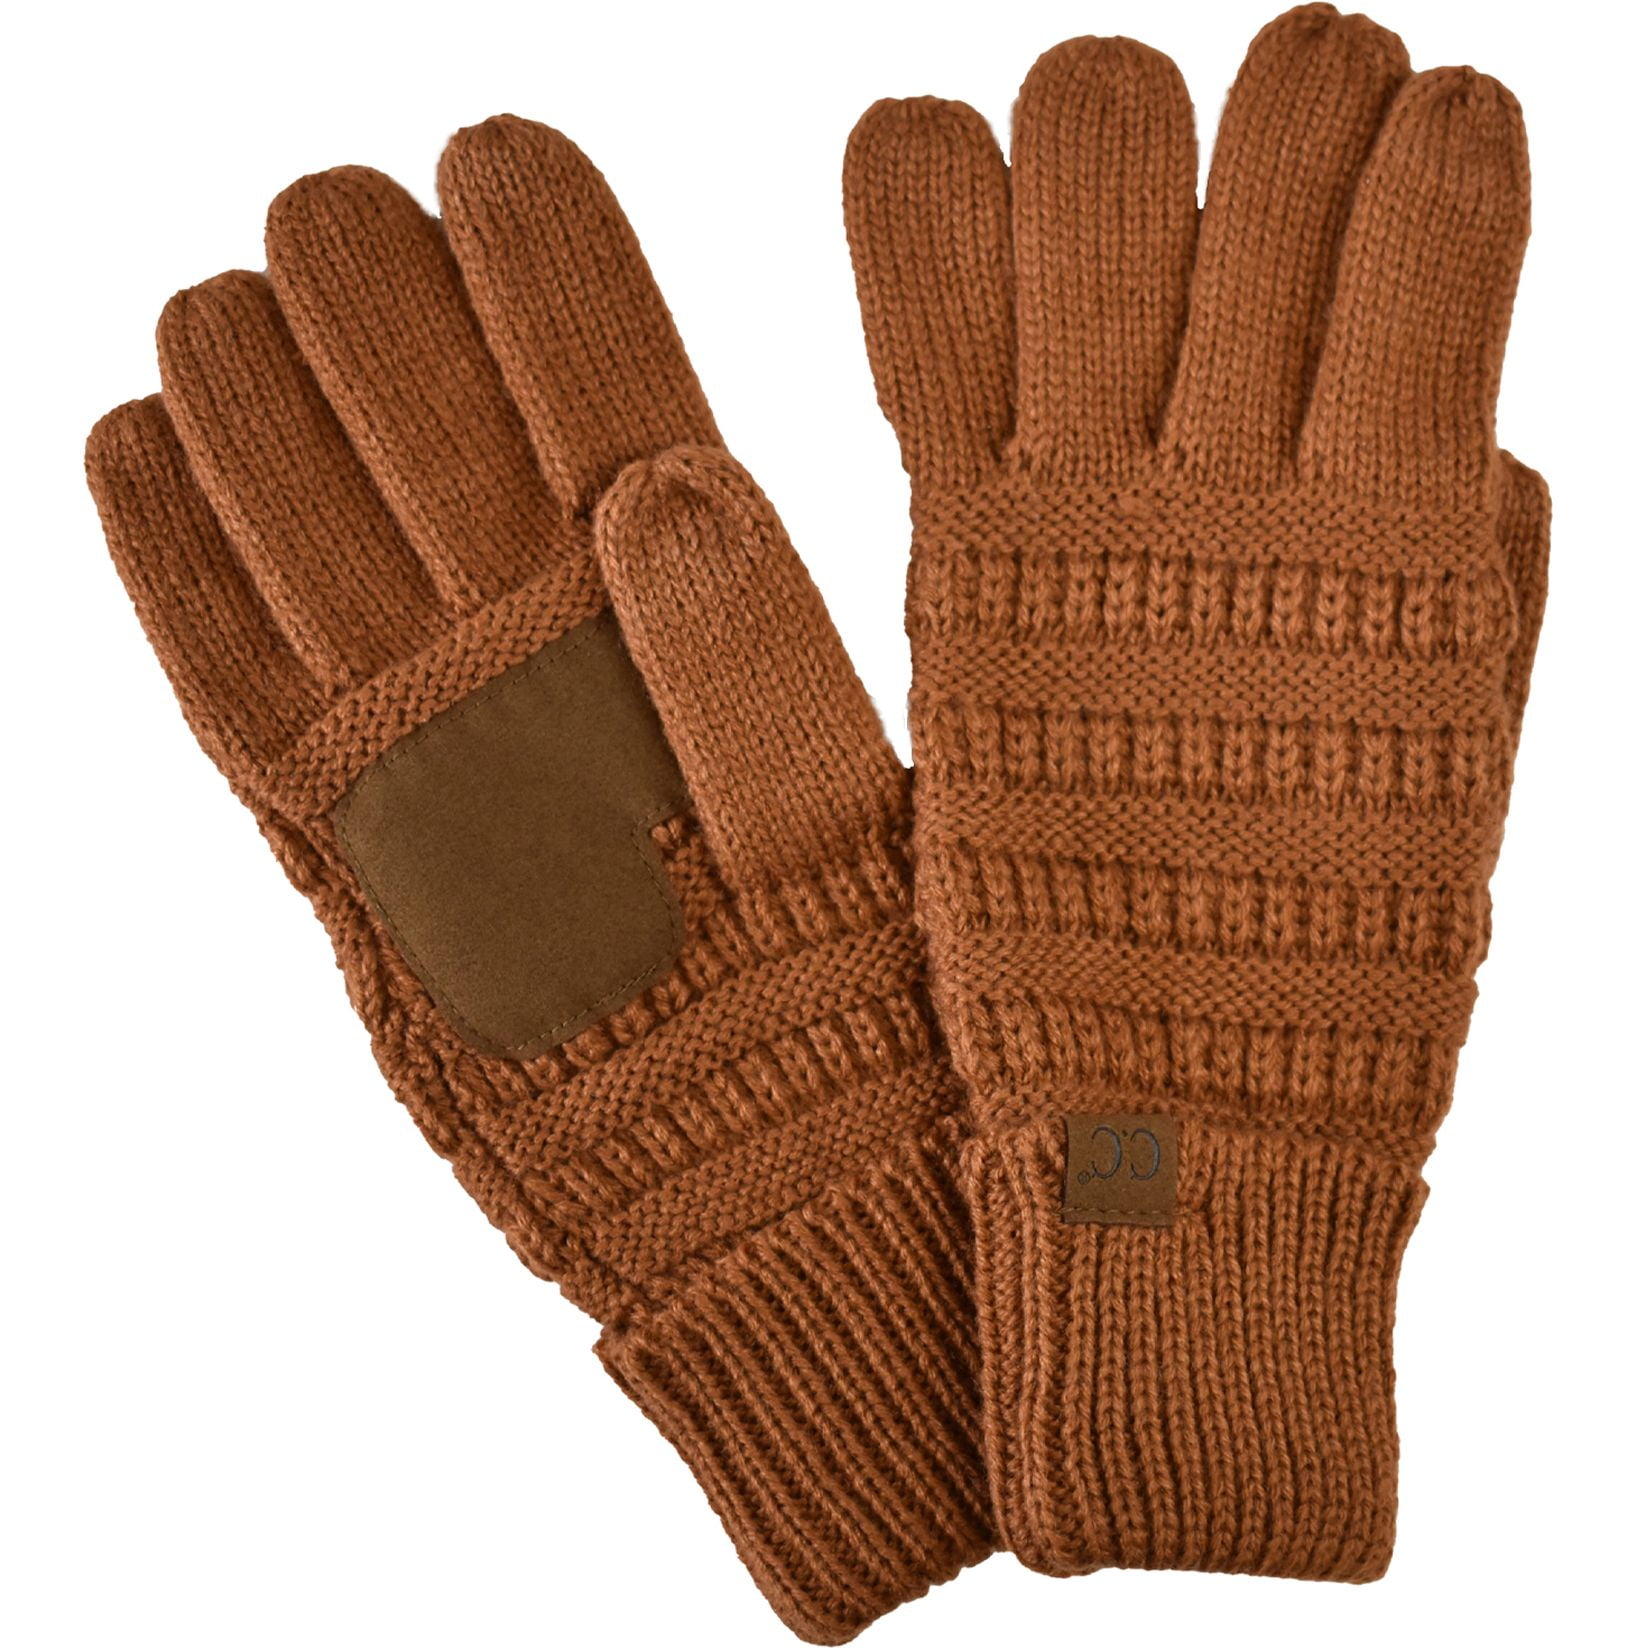 Men's Broner Ragg Wool Glove Mitts with Thinsulate One Size Fits Most #13-559 